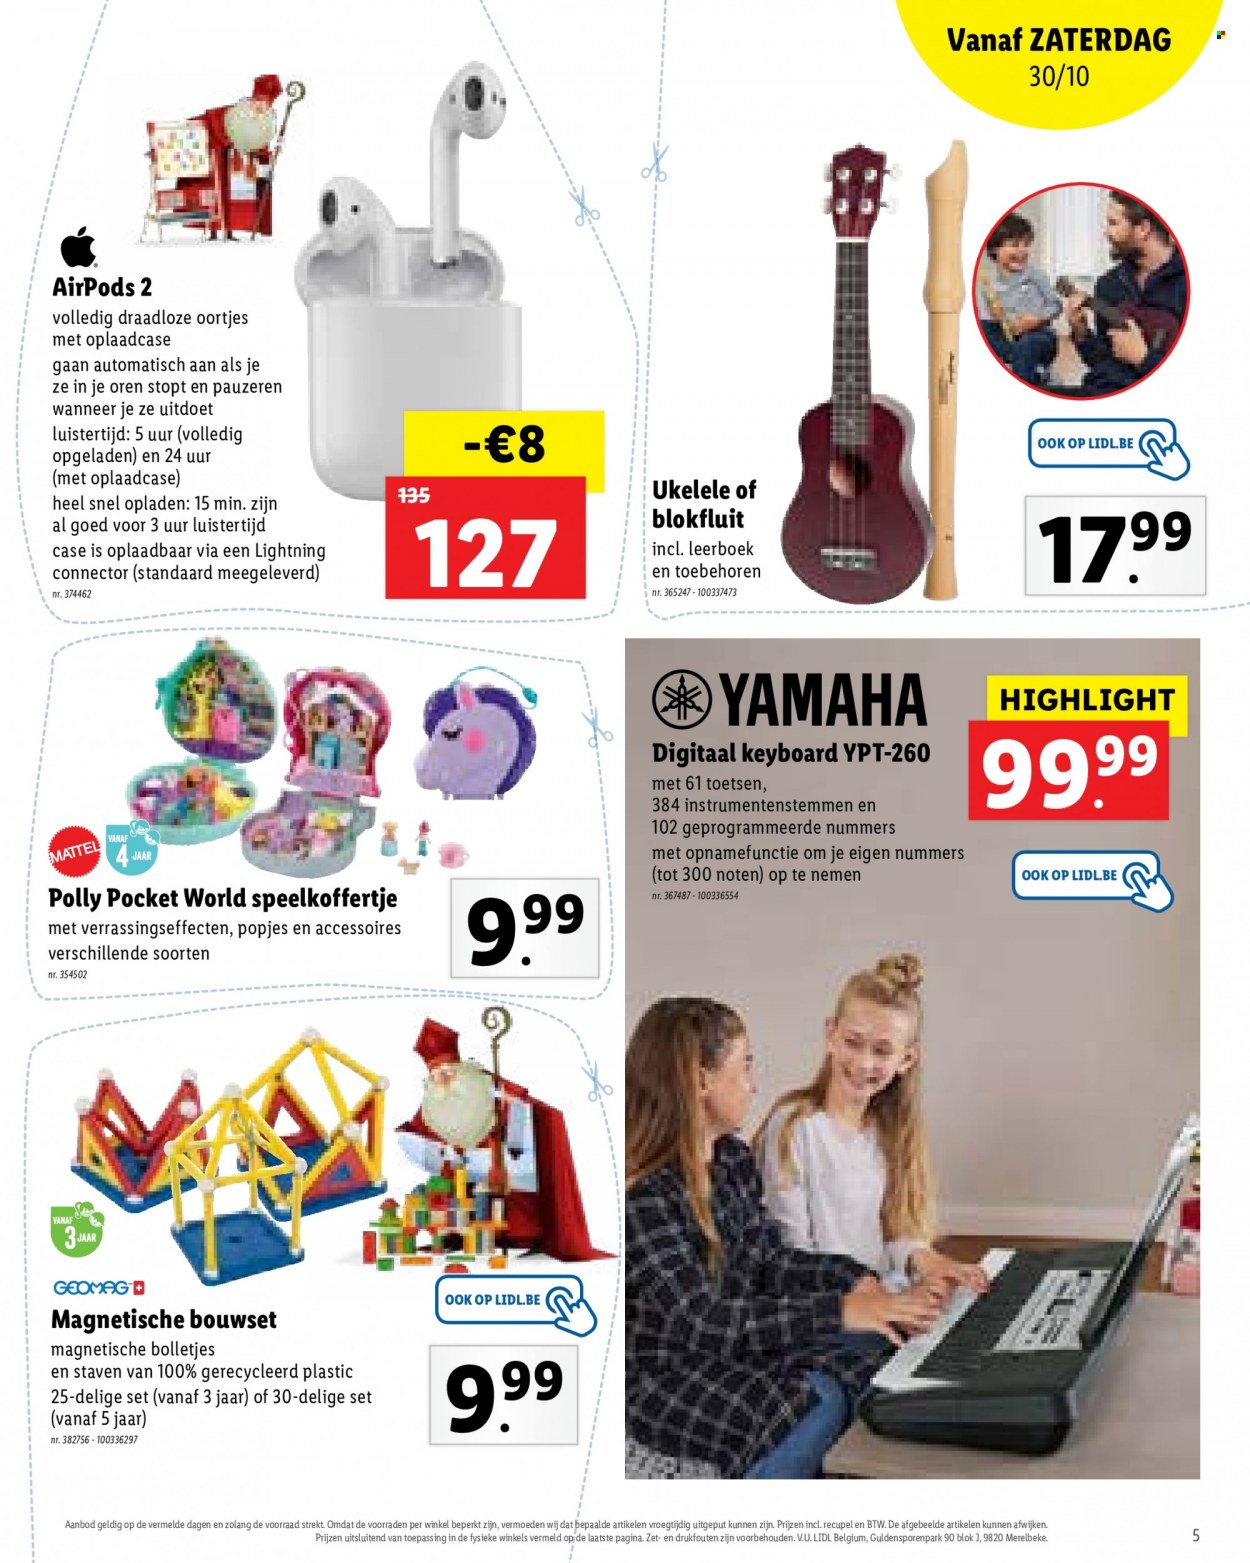 Catalogue Lidl - 25.10.2021 - 30.11.2021. Page 5.